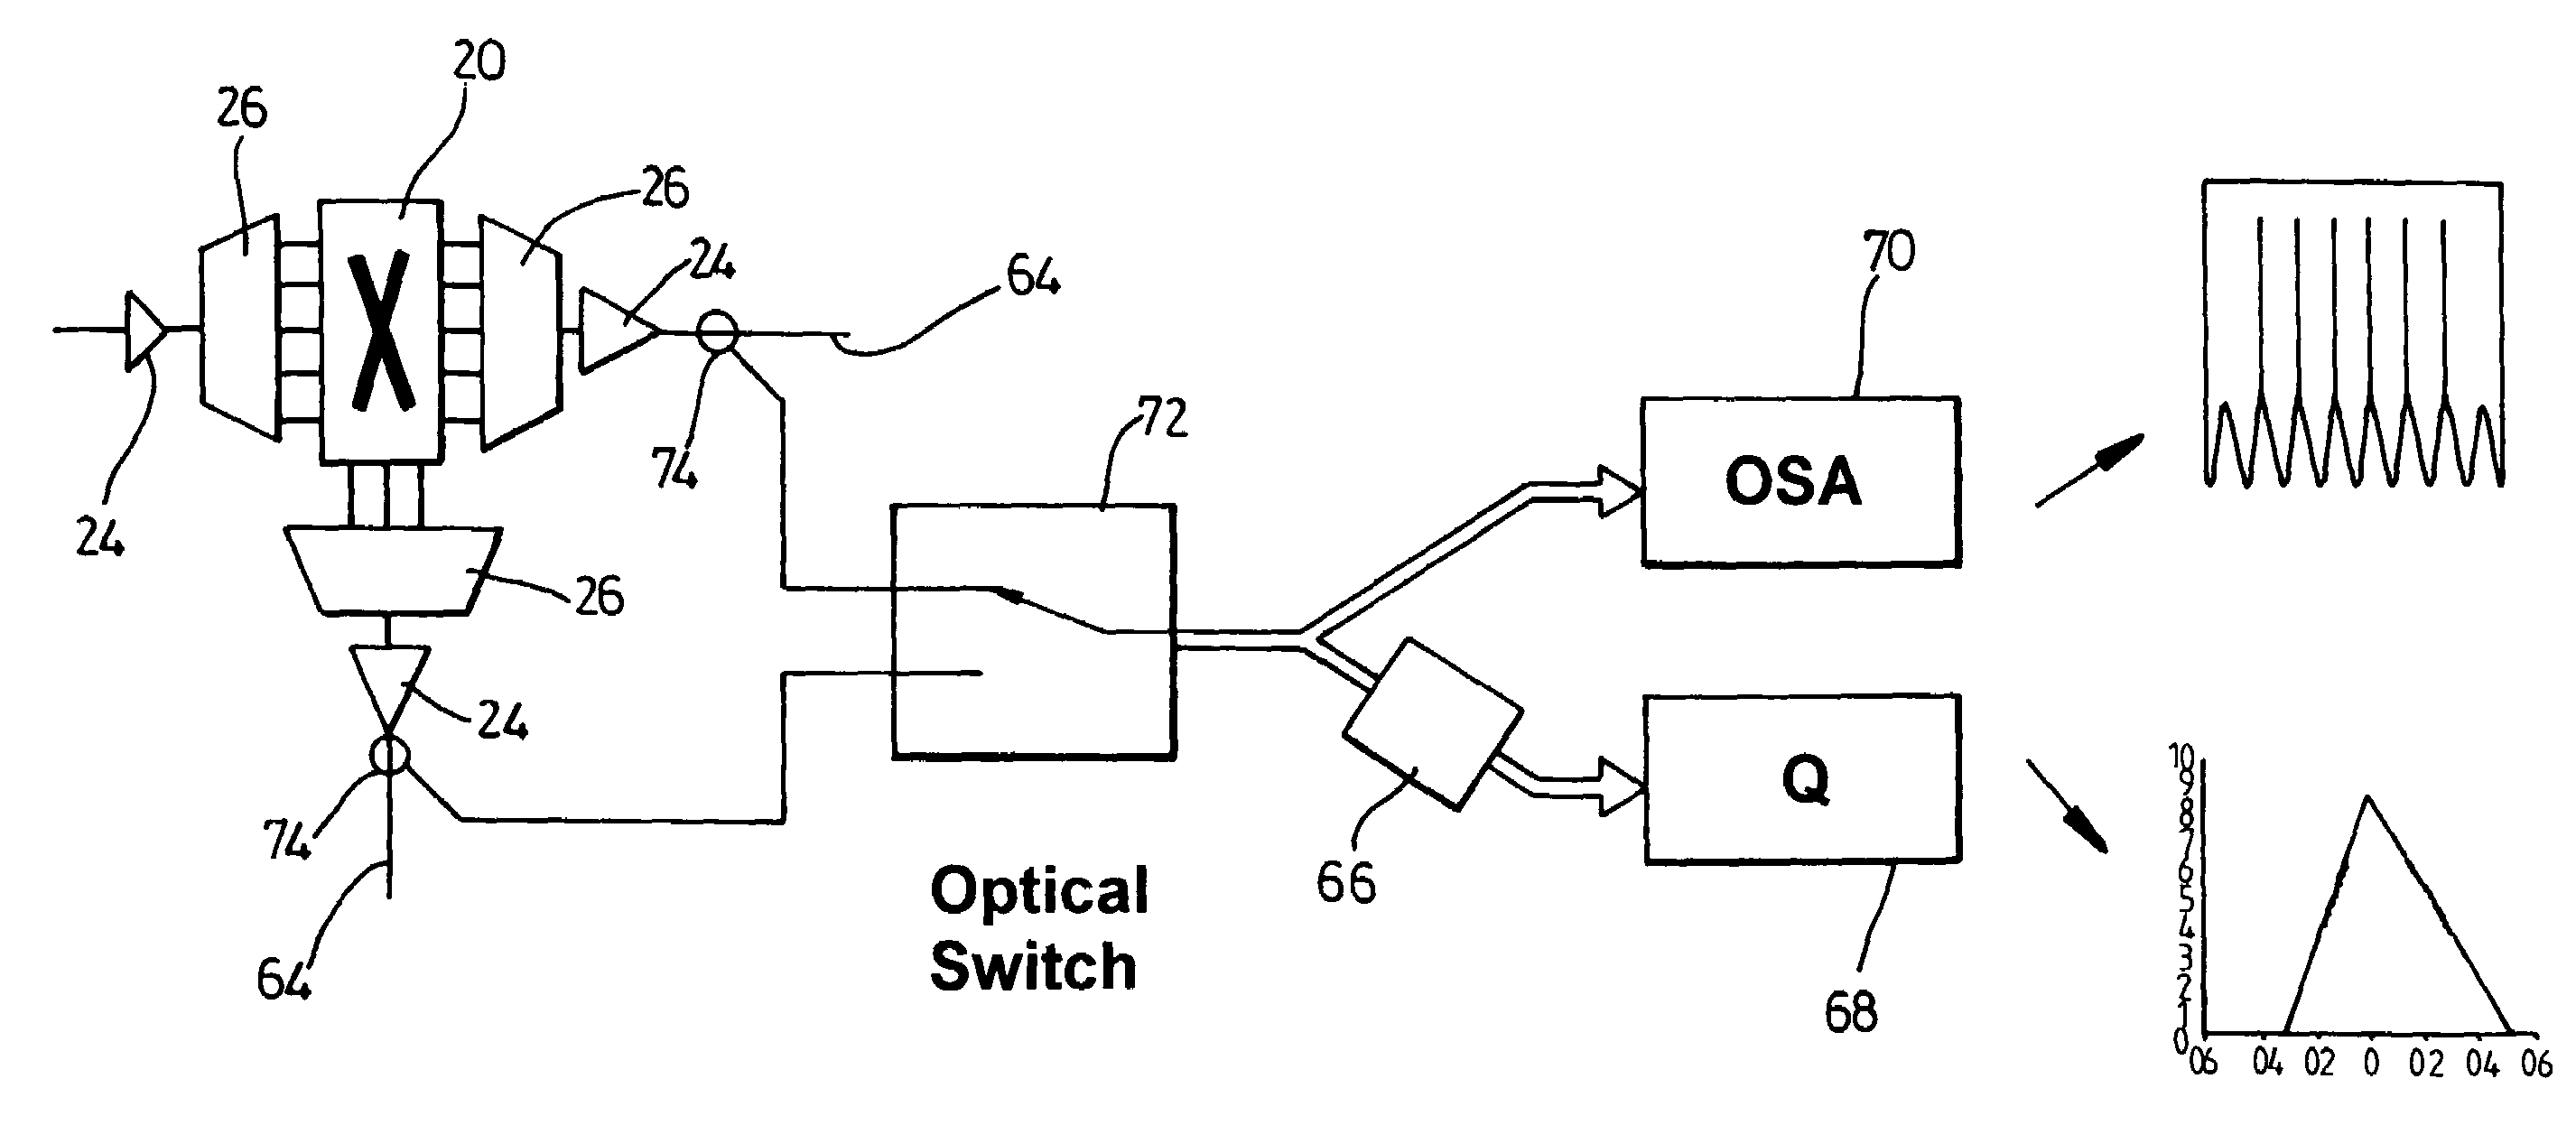 Method and apparatus for rapidly measuring optical transmission characteristics in photonic networks